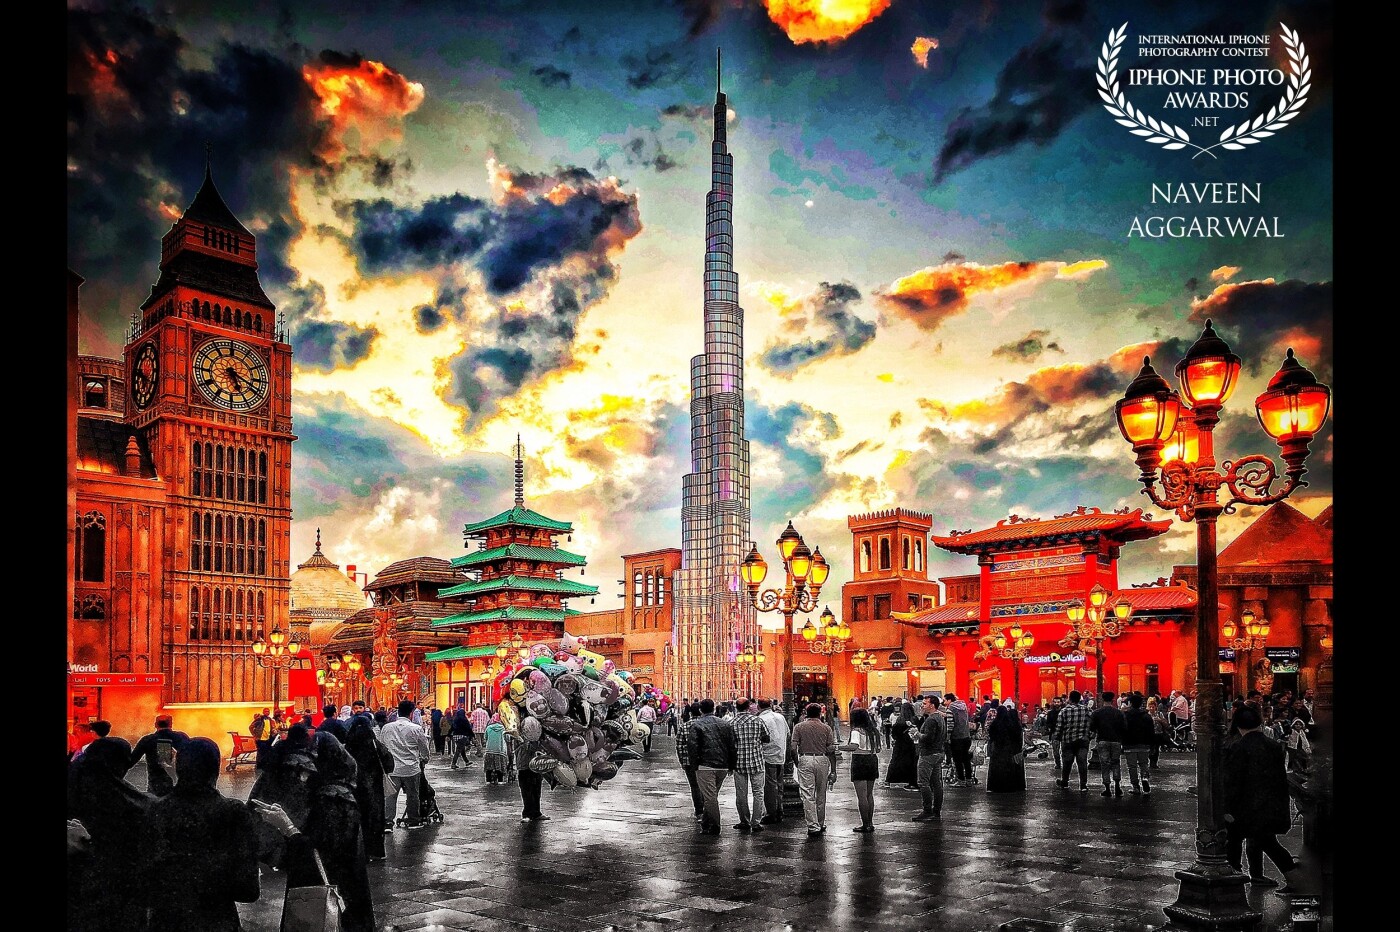 Global village in Dubai <br />
All-time famous for an exhibition showing the whole world in a small space <br />
A place to enjoy world culture and food in one place and  also enjoying international music too<br />
